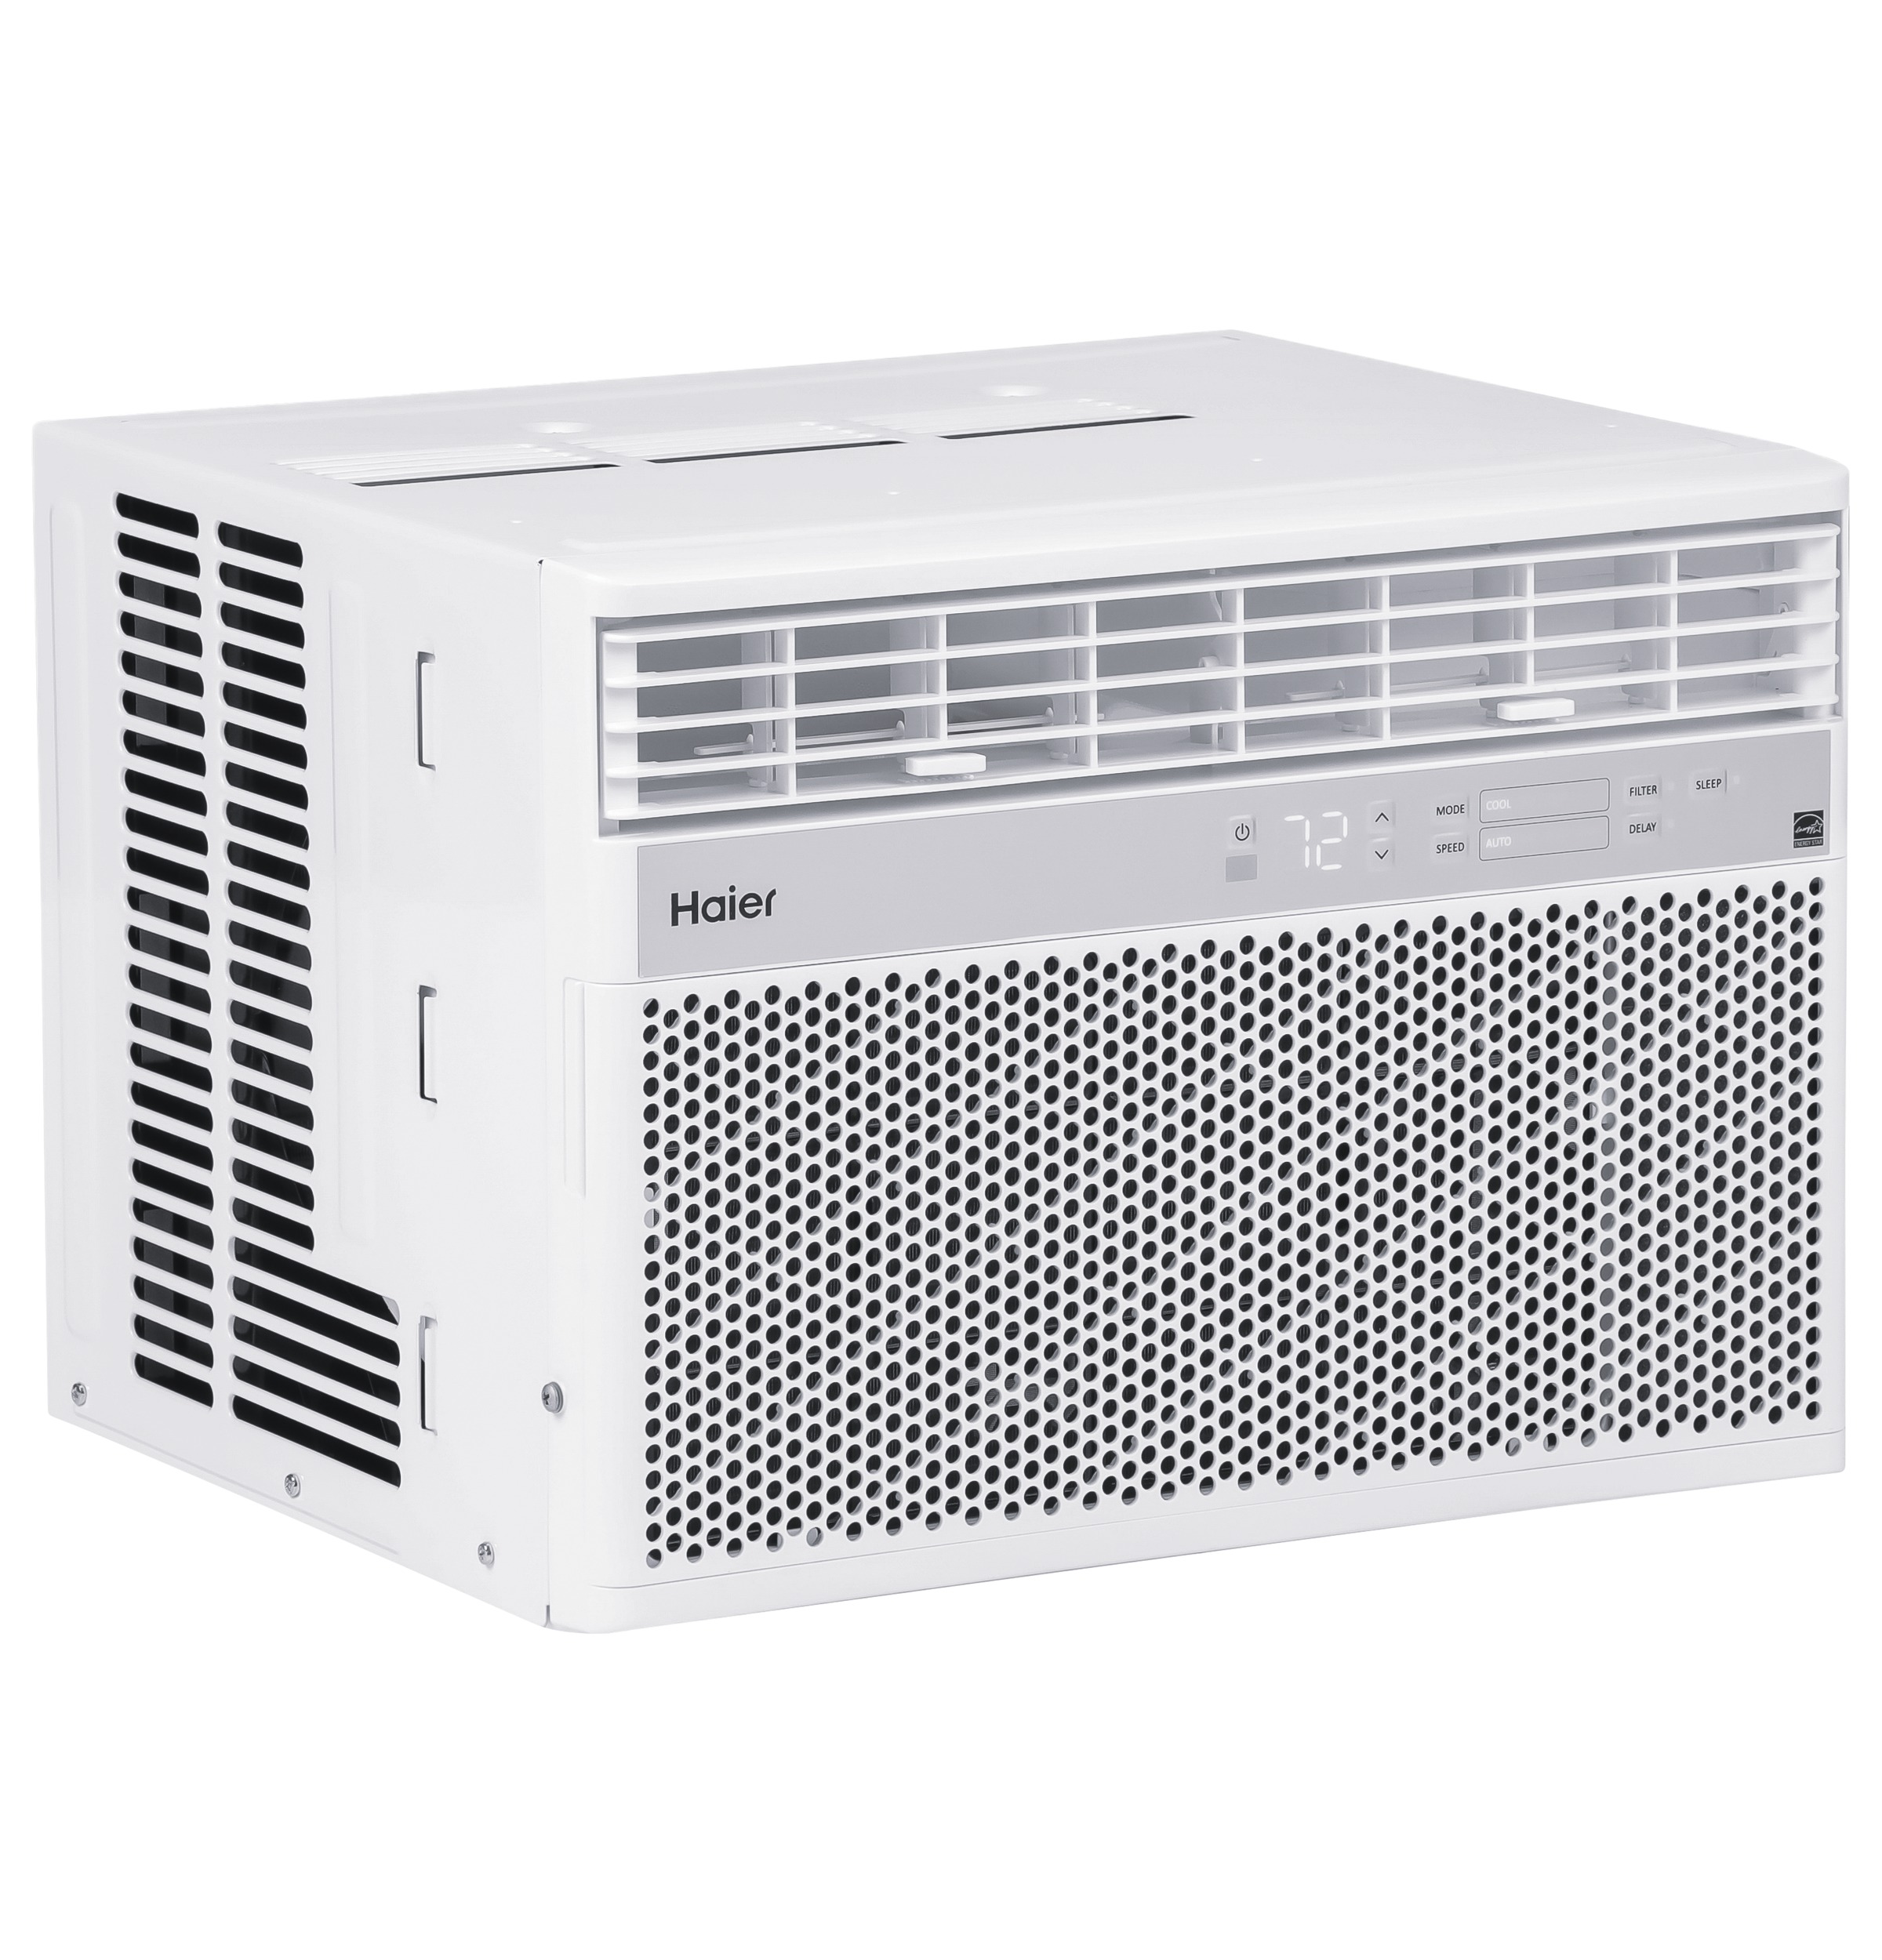 Haier QHM08LX 8,000 BTU Electronic Window Air Conditioner AC Unit with Remote - image 1 of 7